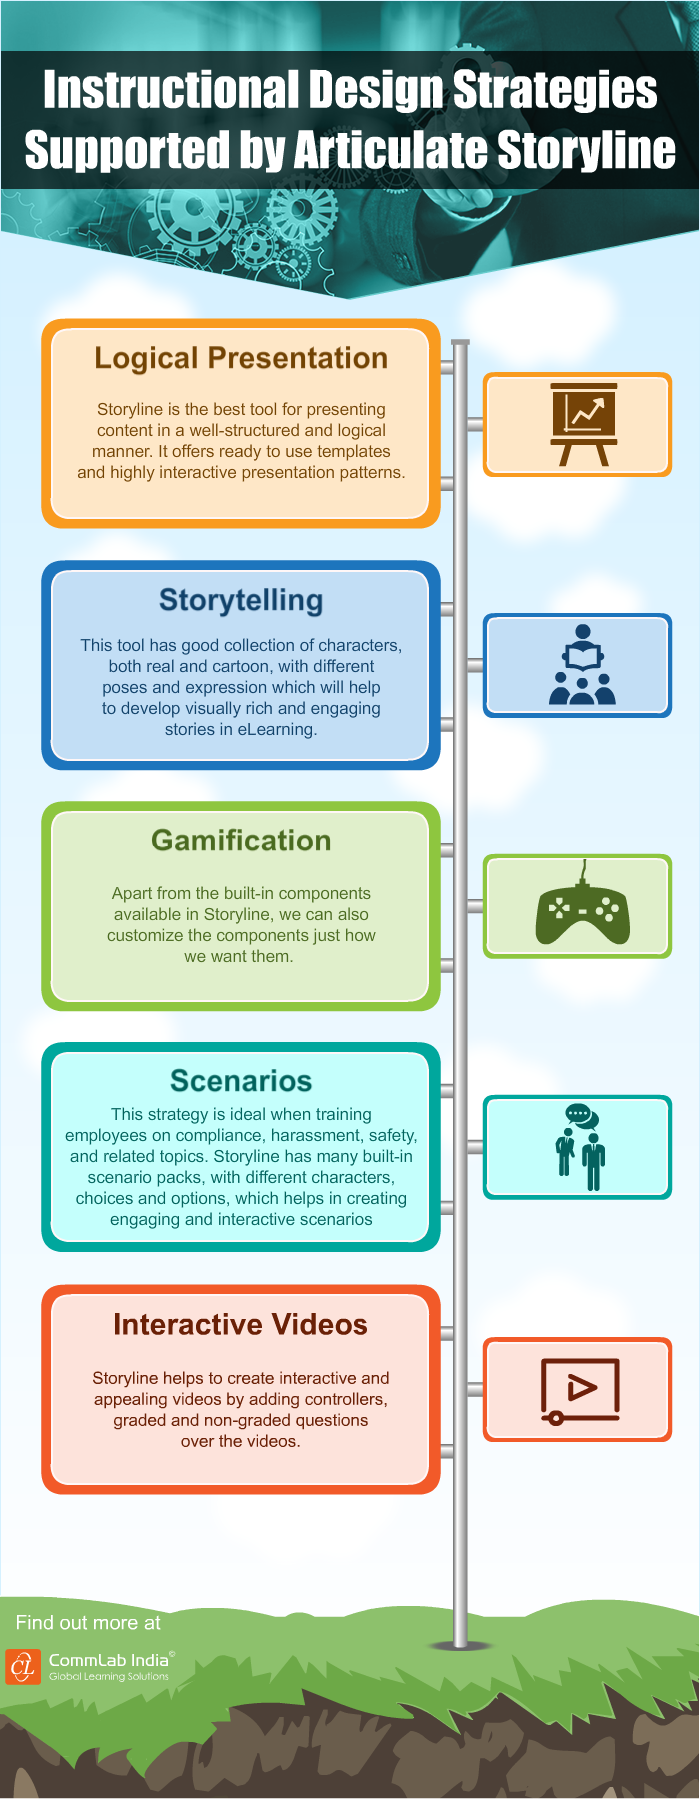 Instructional Design Strategies Supported by Articulate Storyline [Infographic]